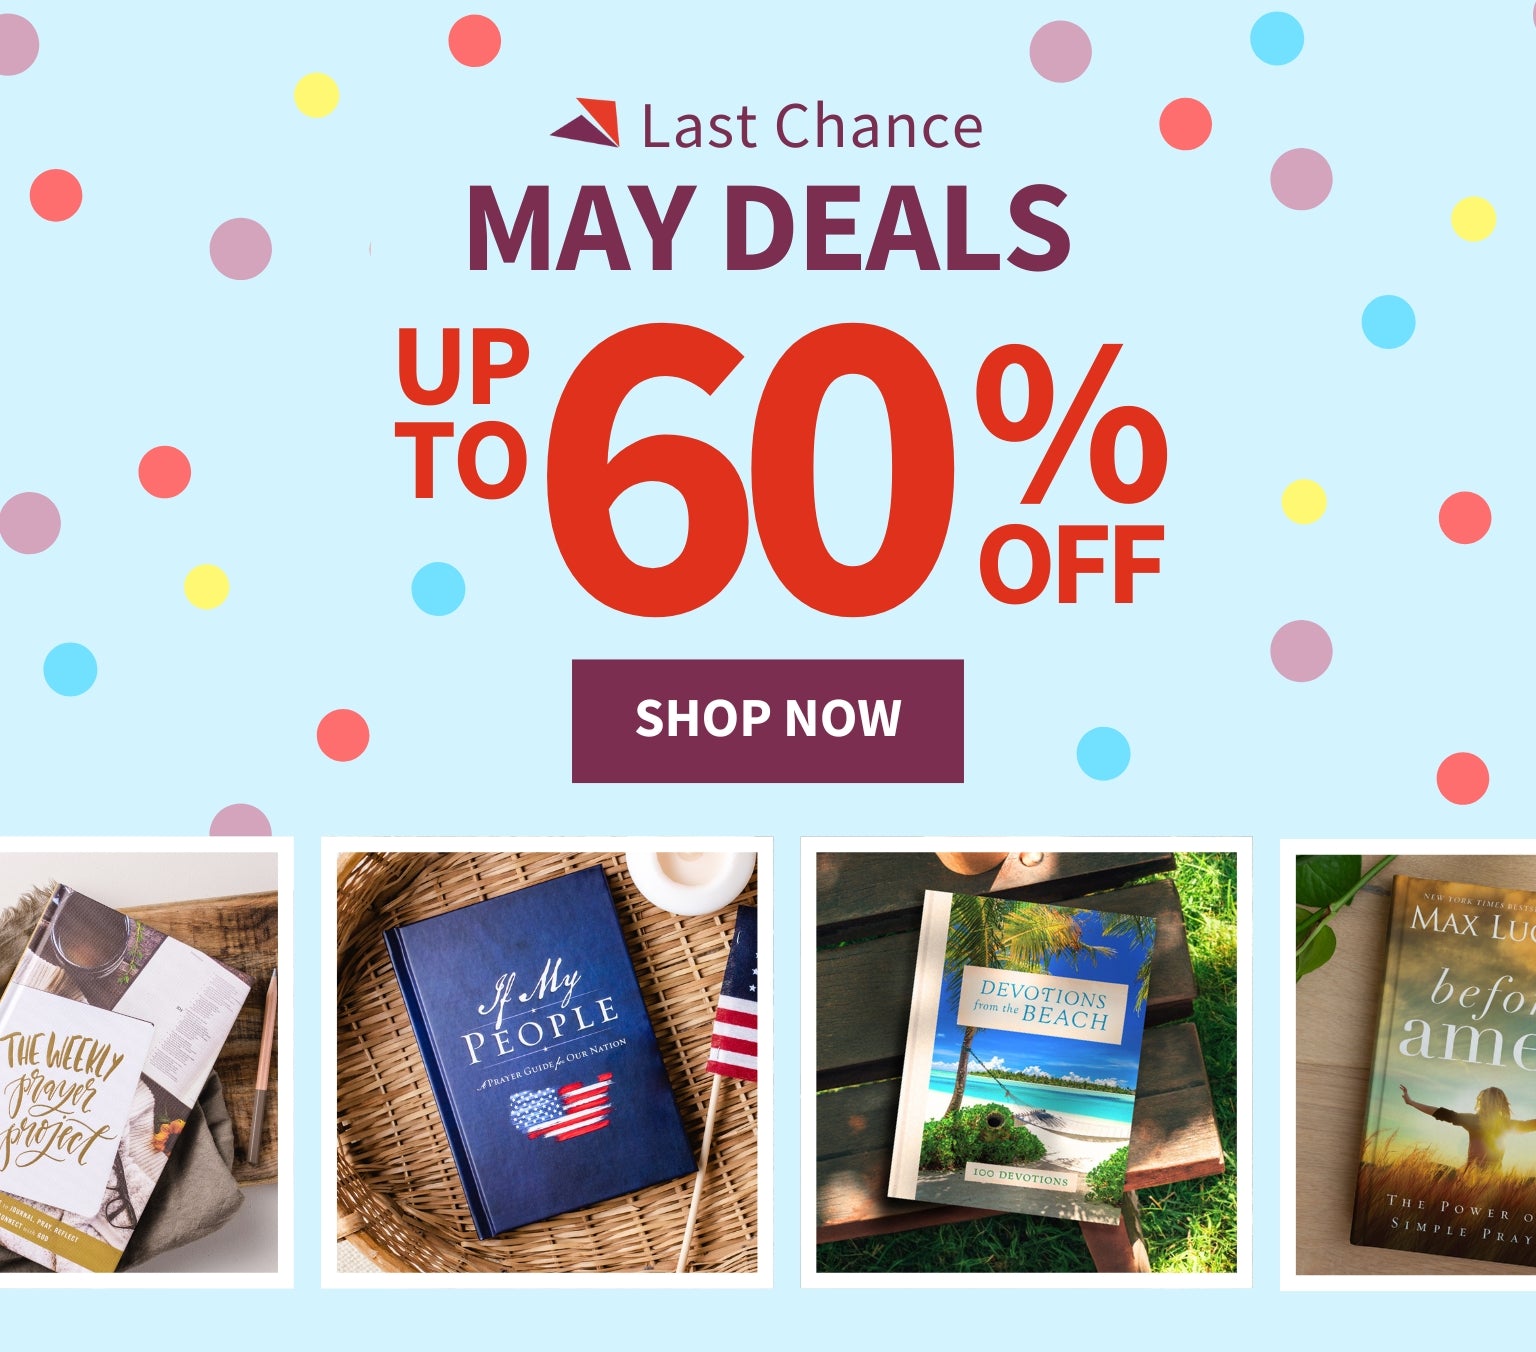 Last Chance May Deals Up to 60% Off Shop Now